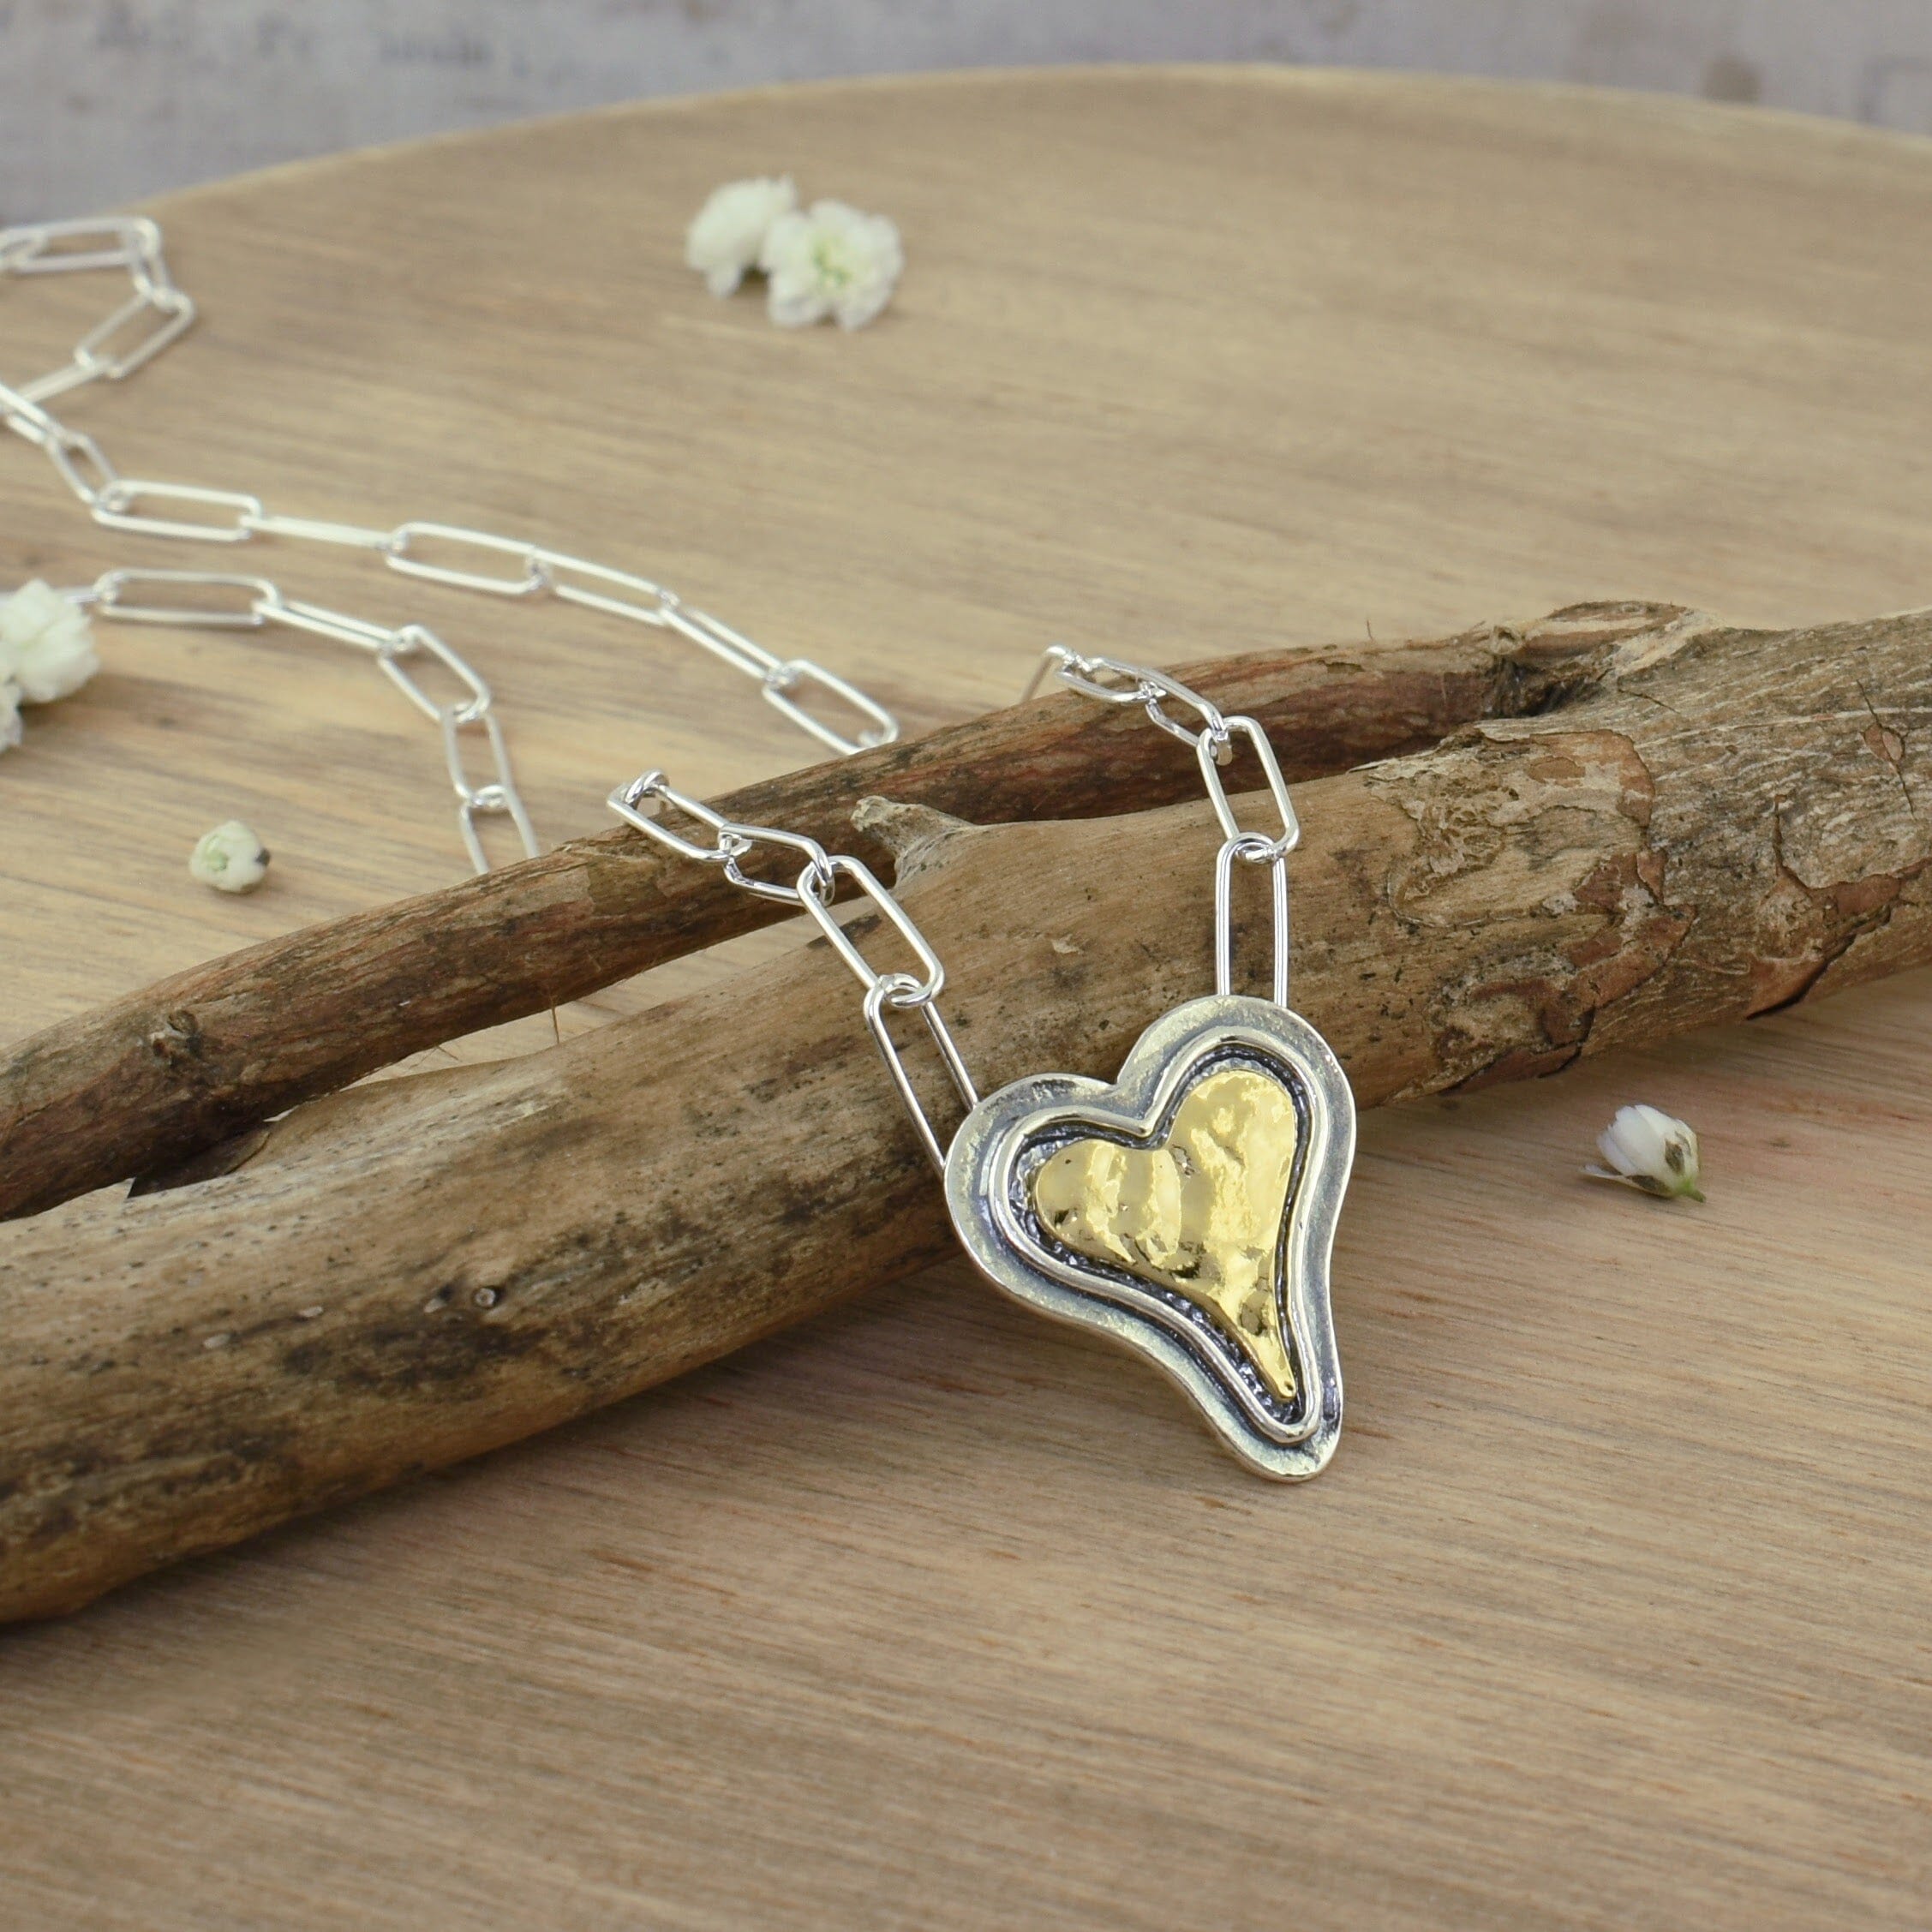 sterling silver paperclip chain necklace featuring a gold plated heart